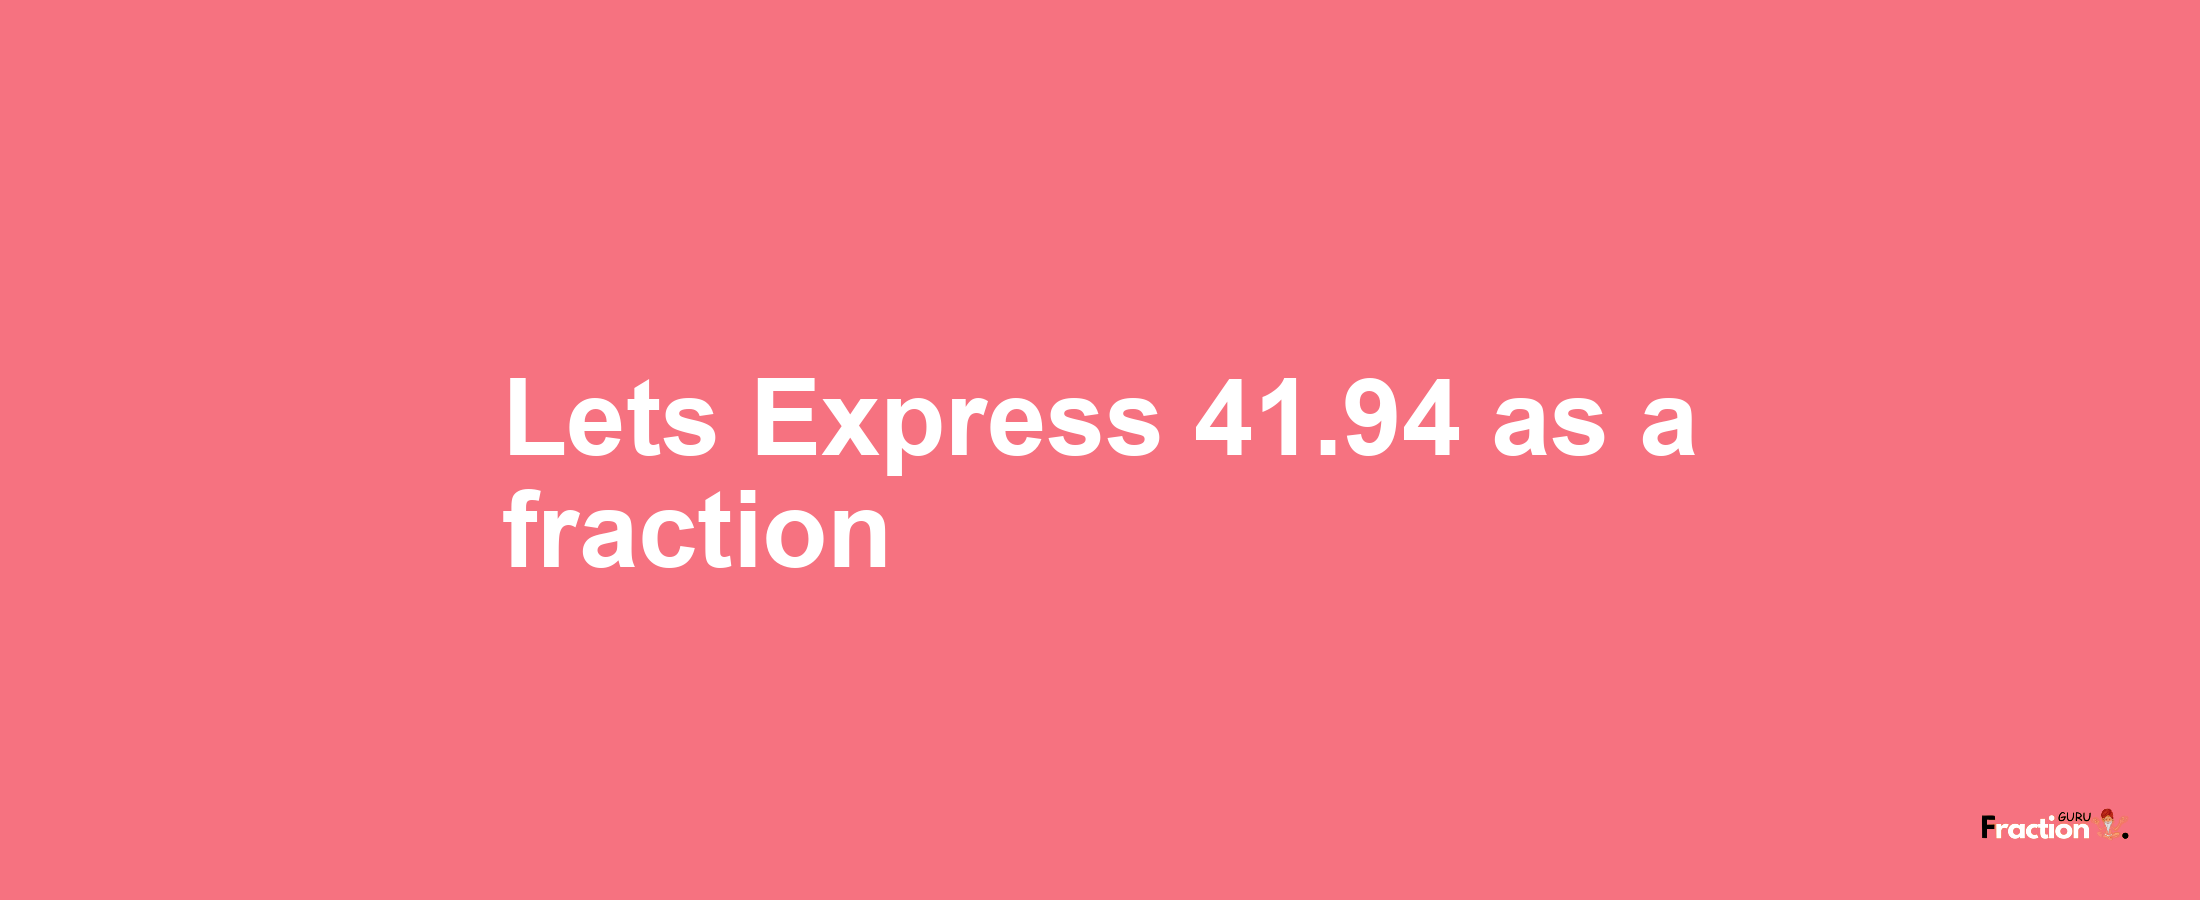 Lets Express 41.94 as afraction